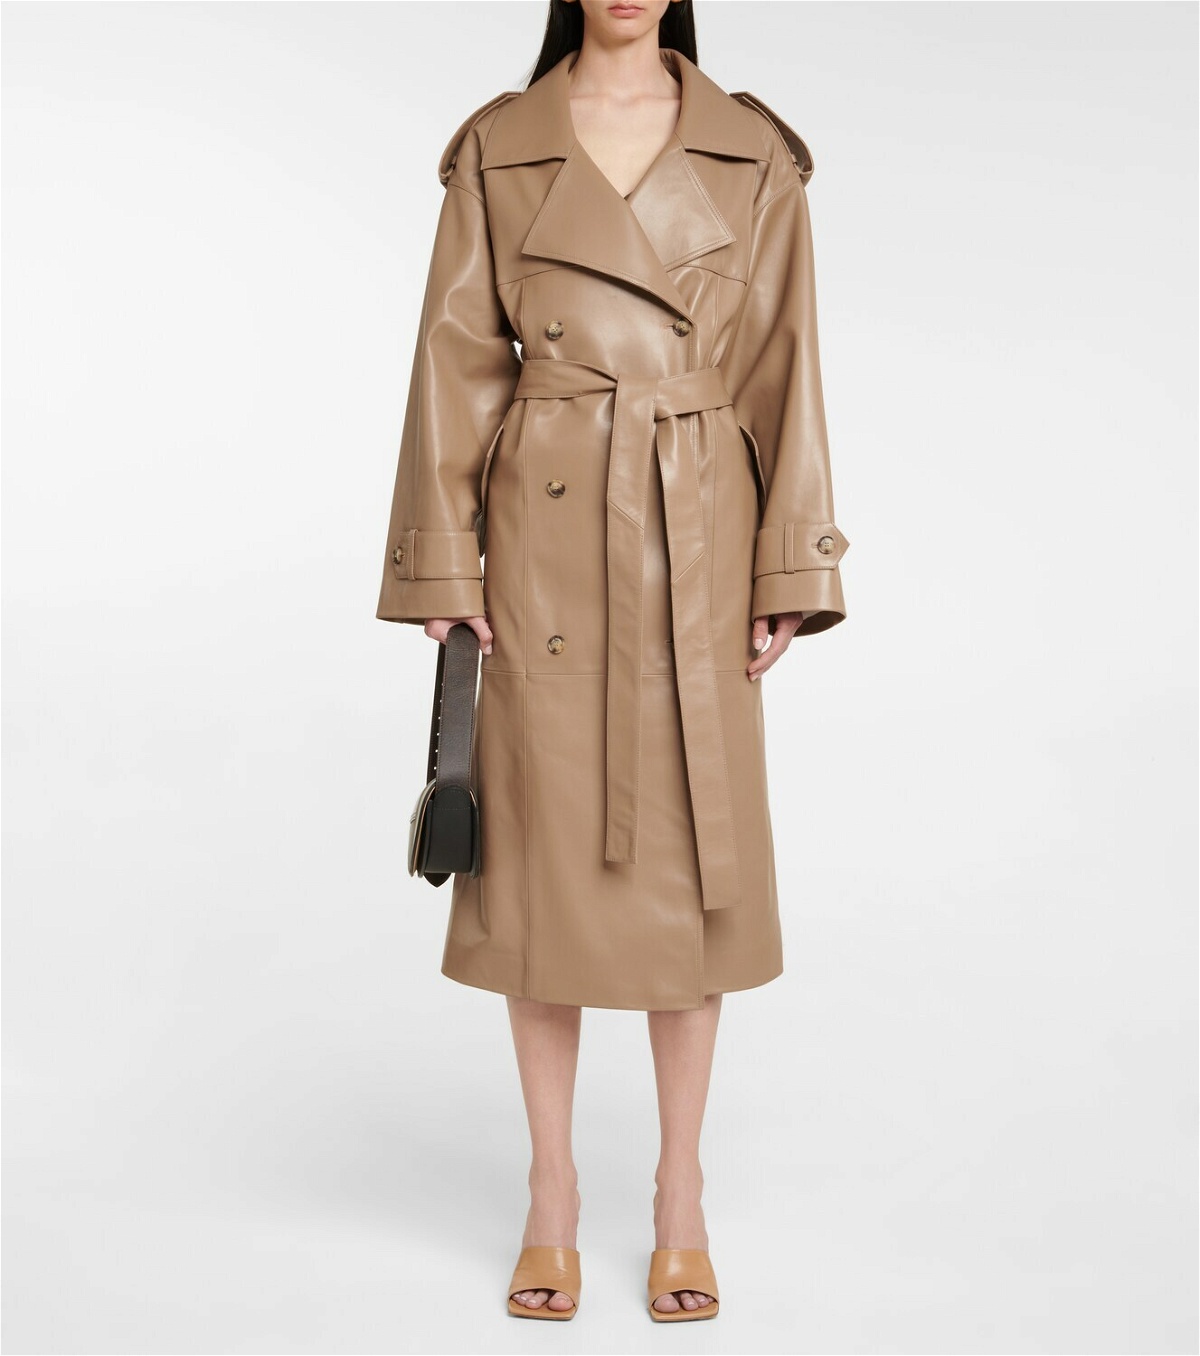 The Mannei Amman leather trench coat